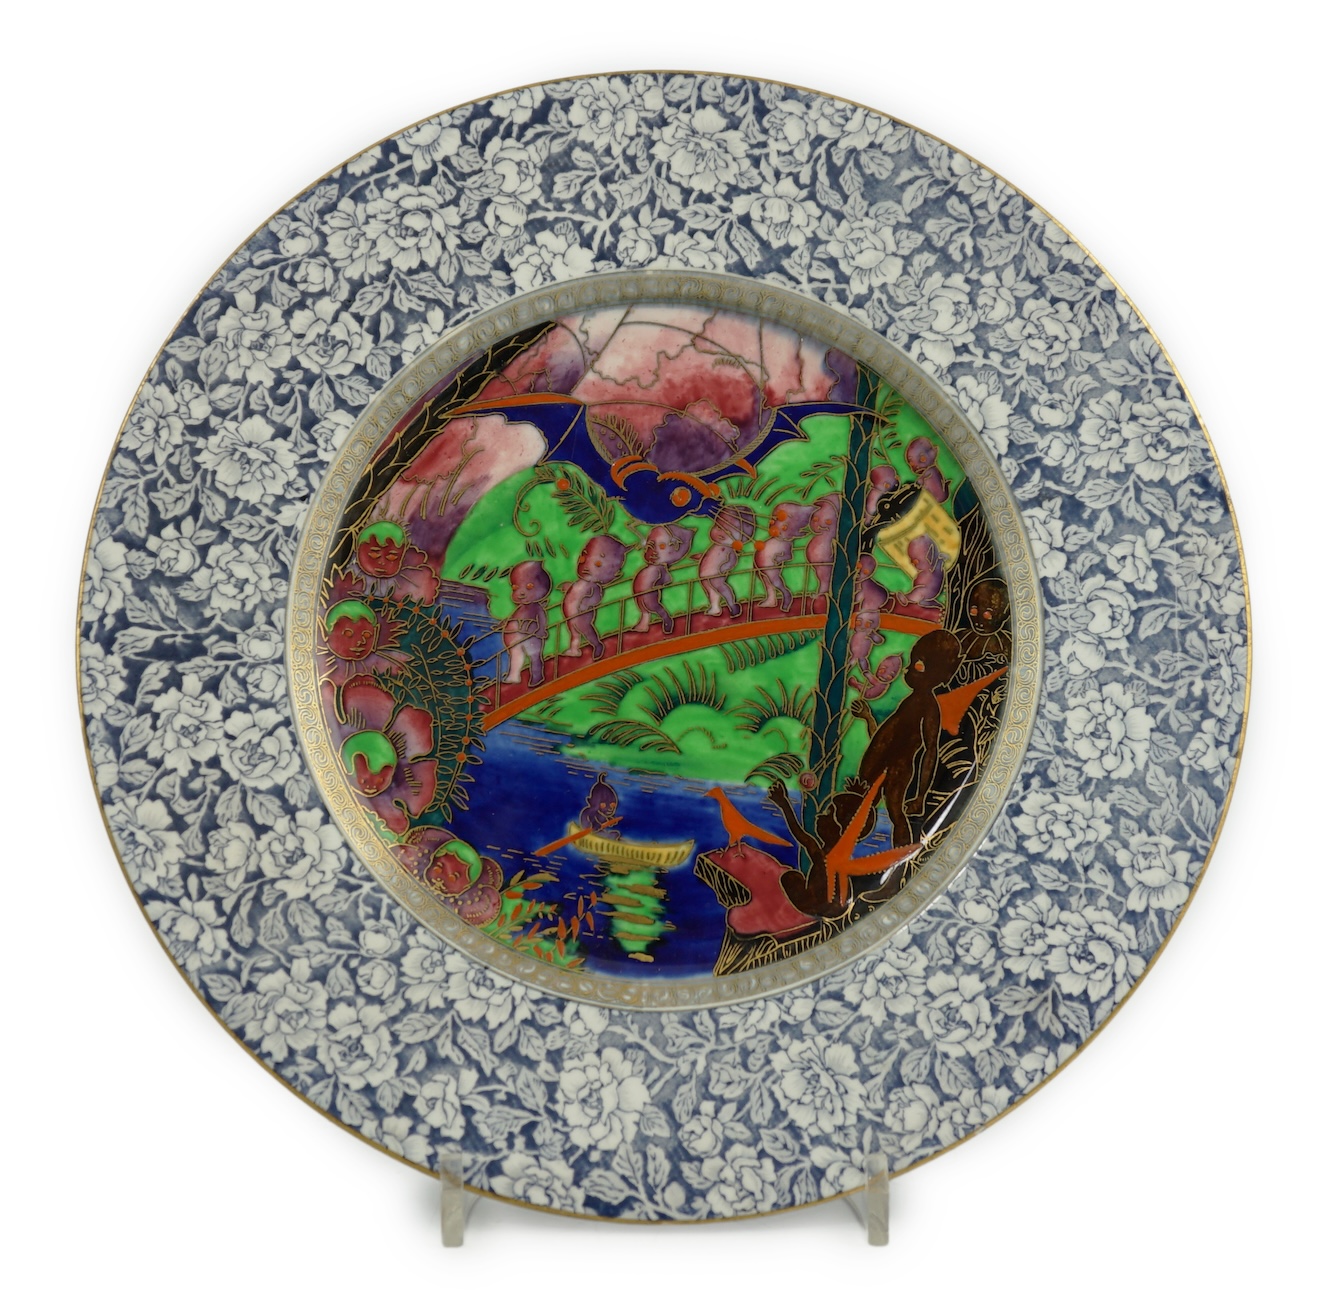 A Wedgwood Fairyland lustre ‘Lincoln’ plate, designed by Daisy Makeig Jones